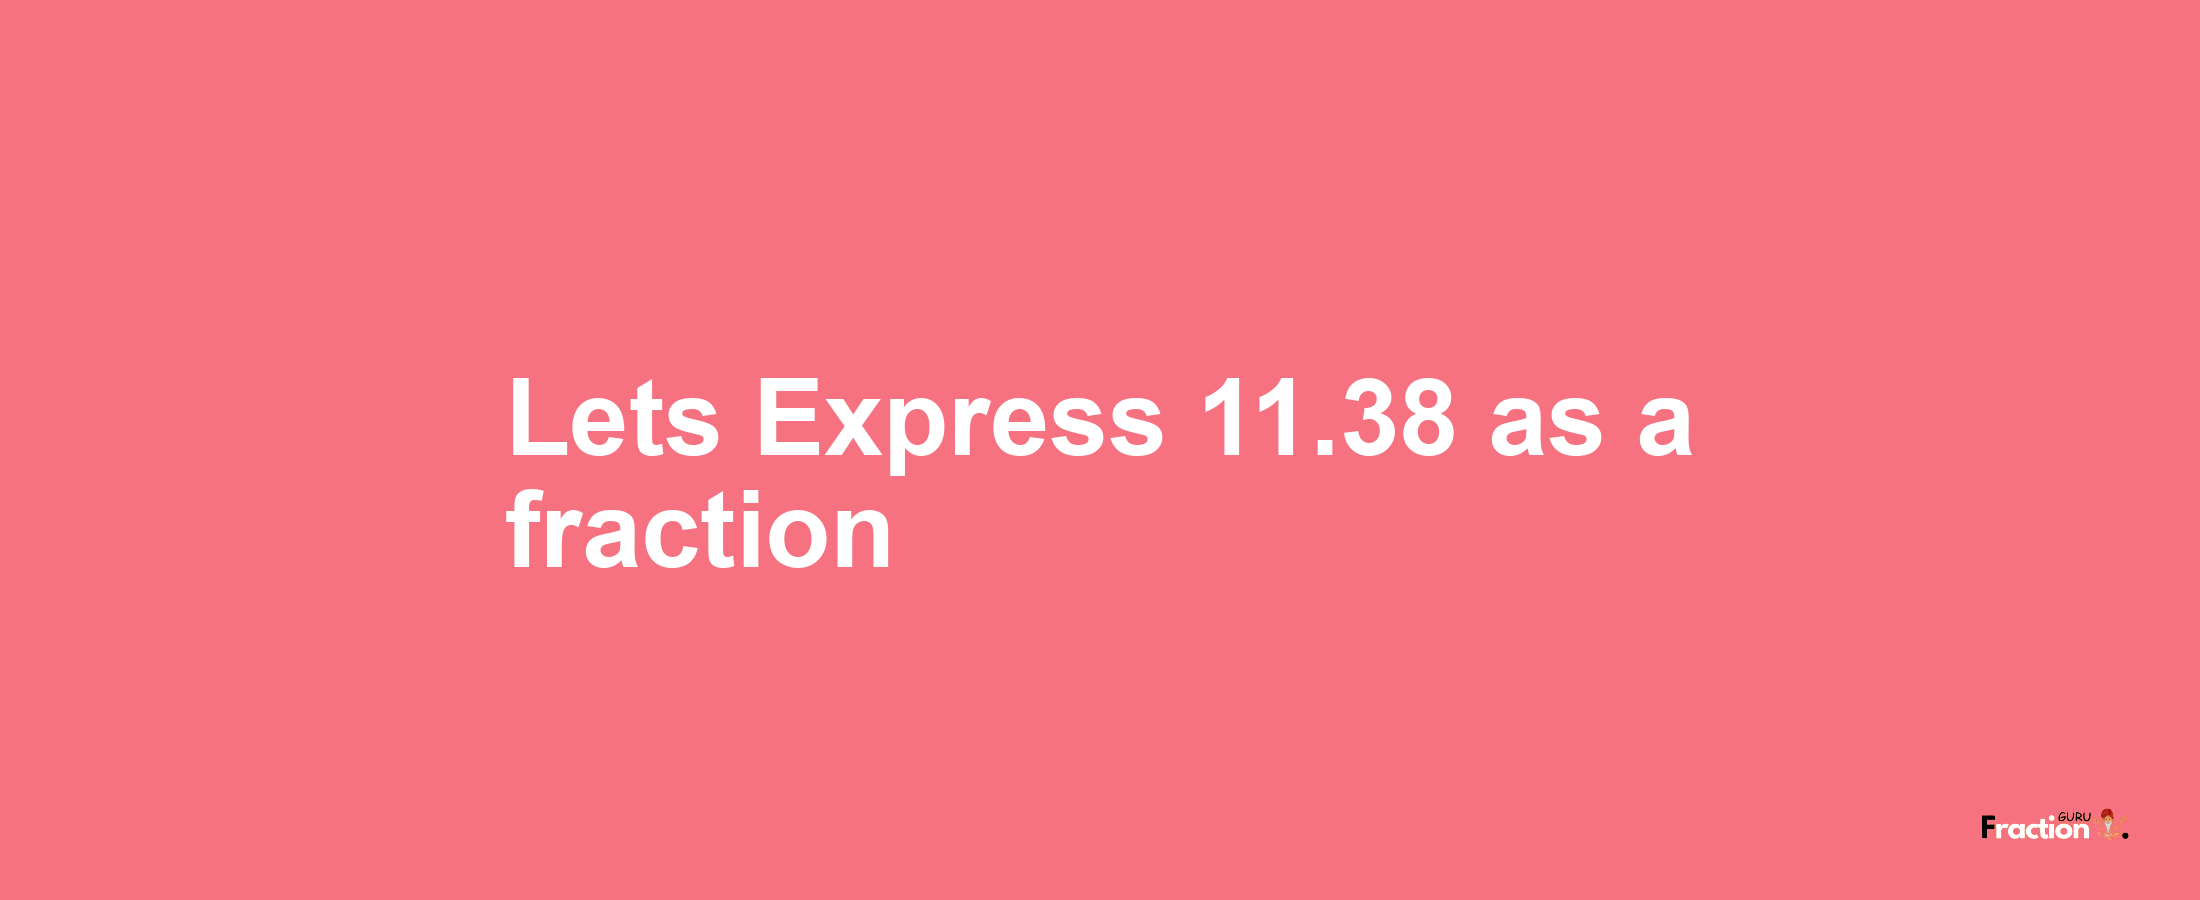 Lets Express 11.38 as afraction